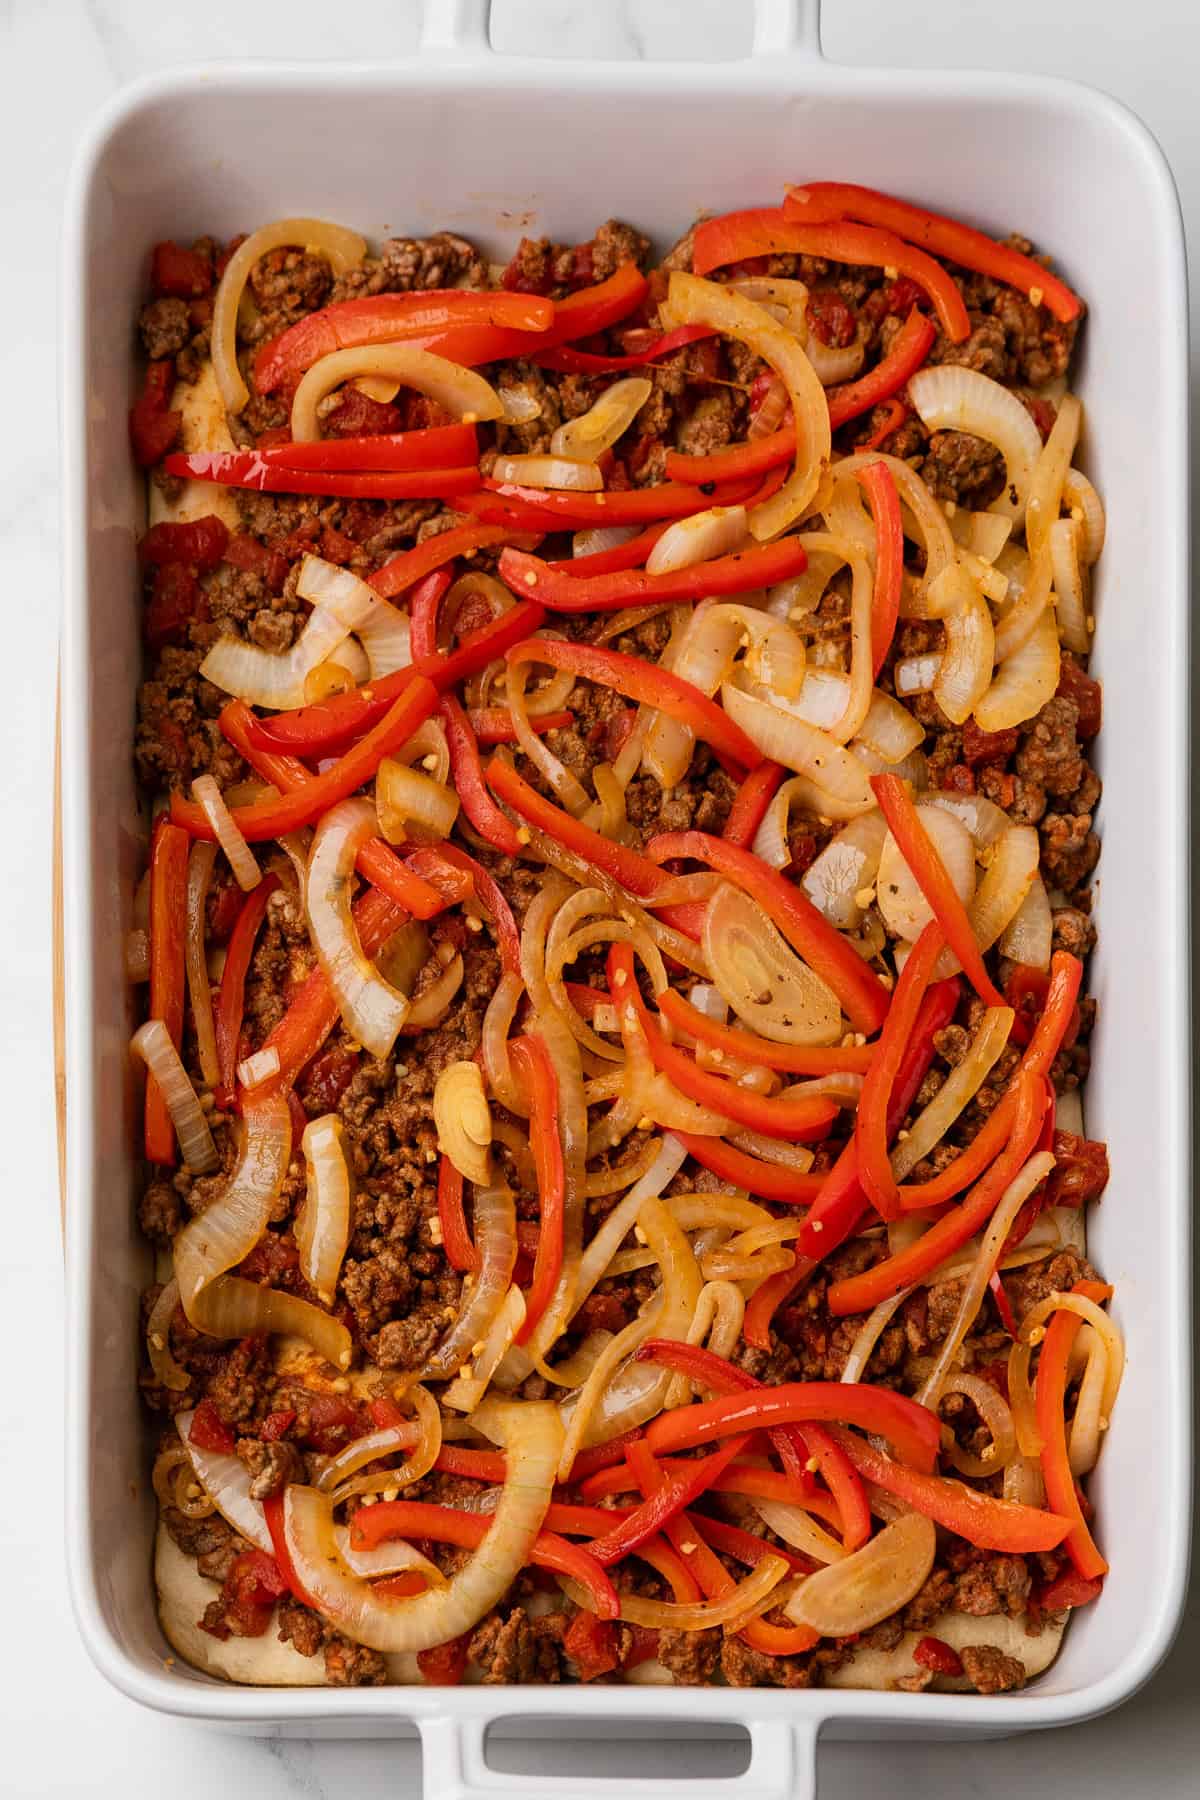 Add cooked onions and red peppers to ground beef layer in baking dish.